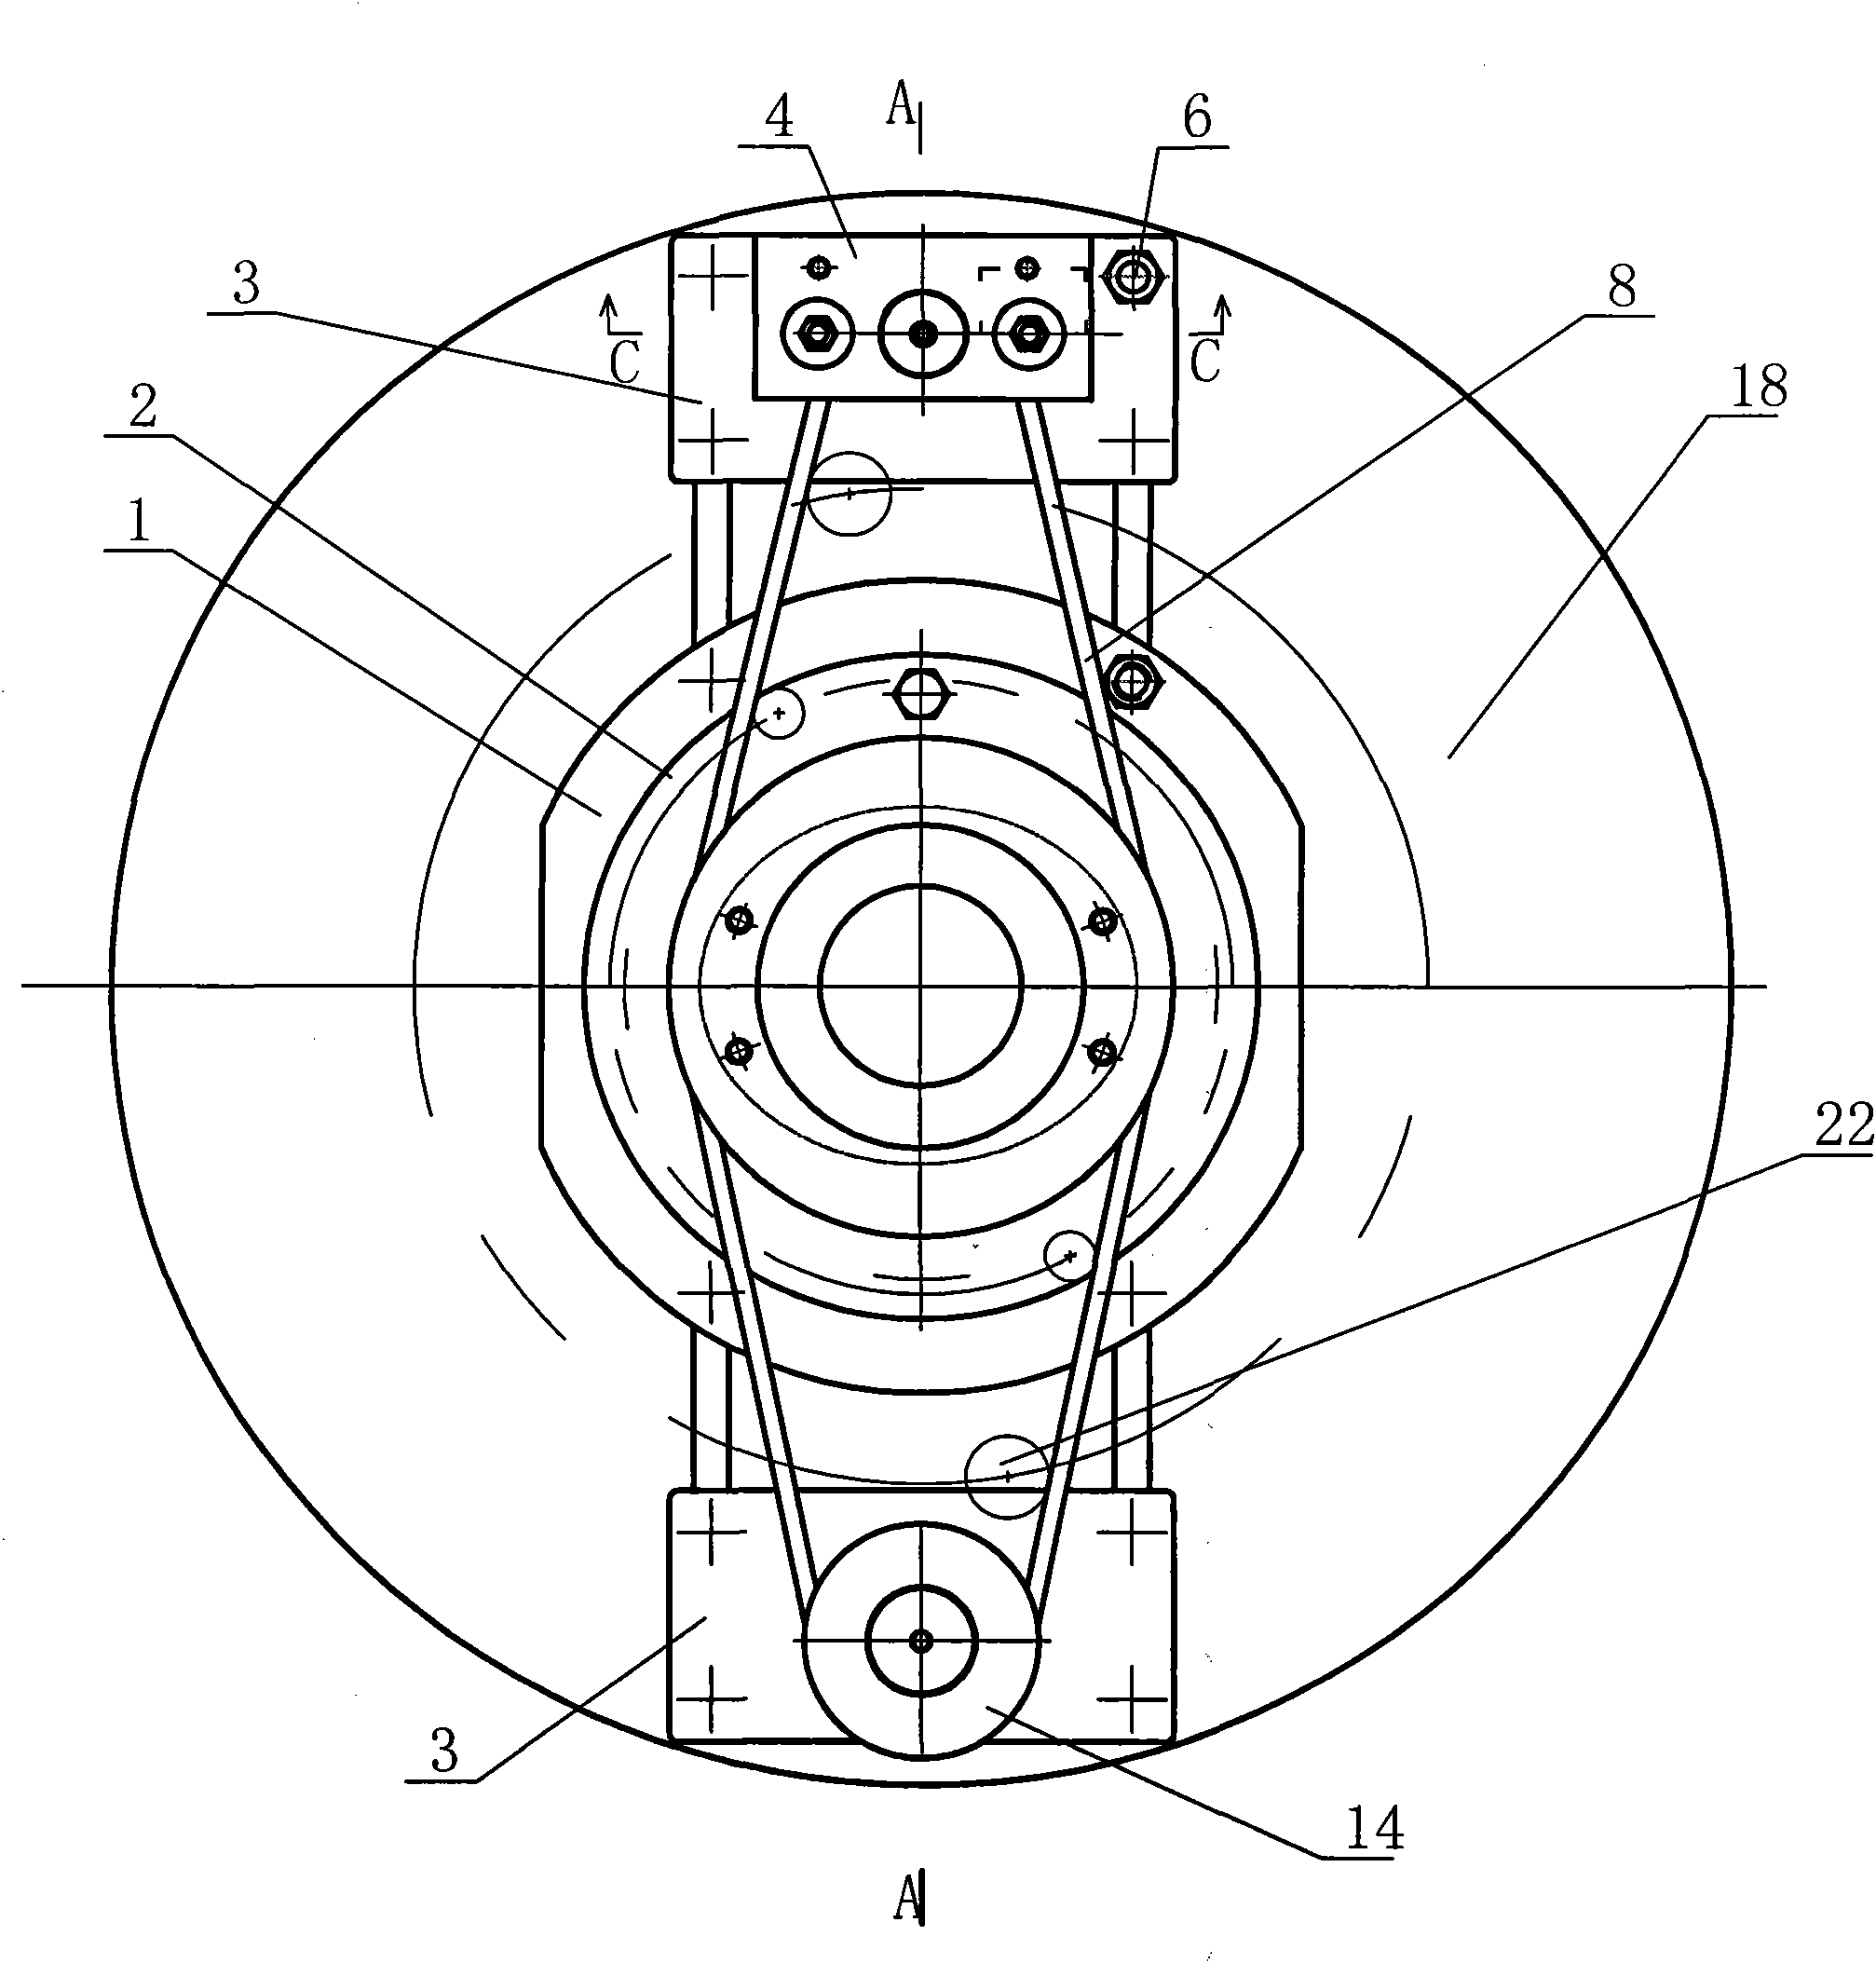 Device for flexibly shifting cylindrical grinding machine workpiece